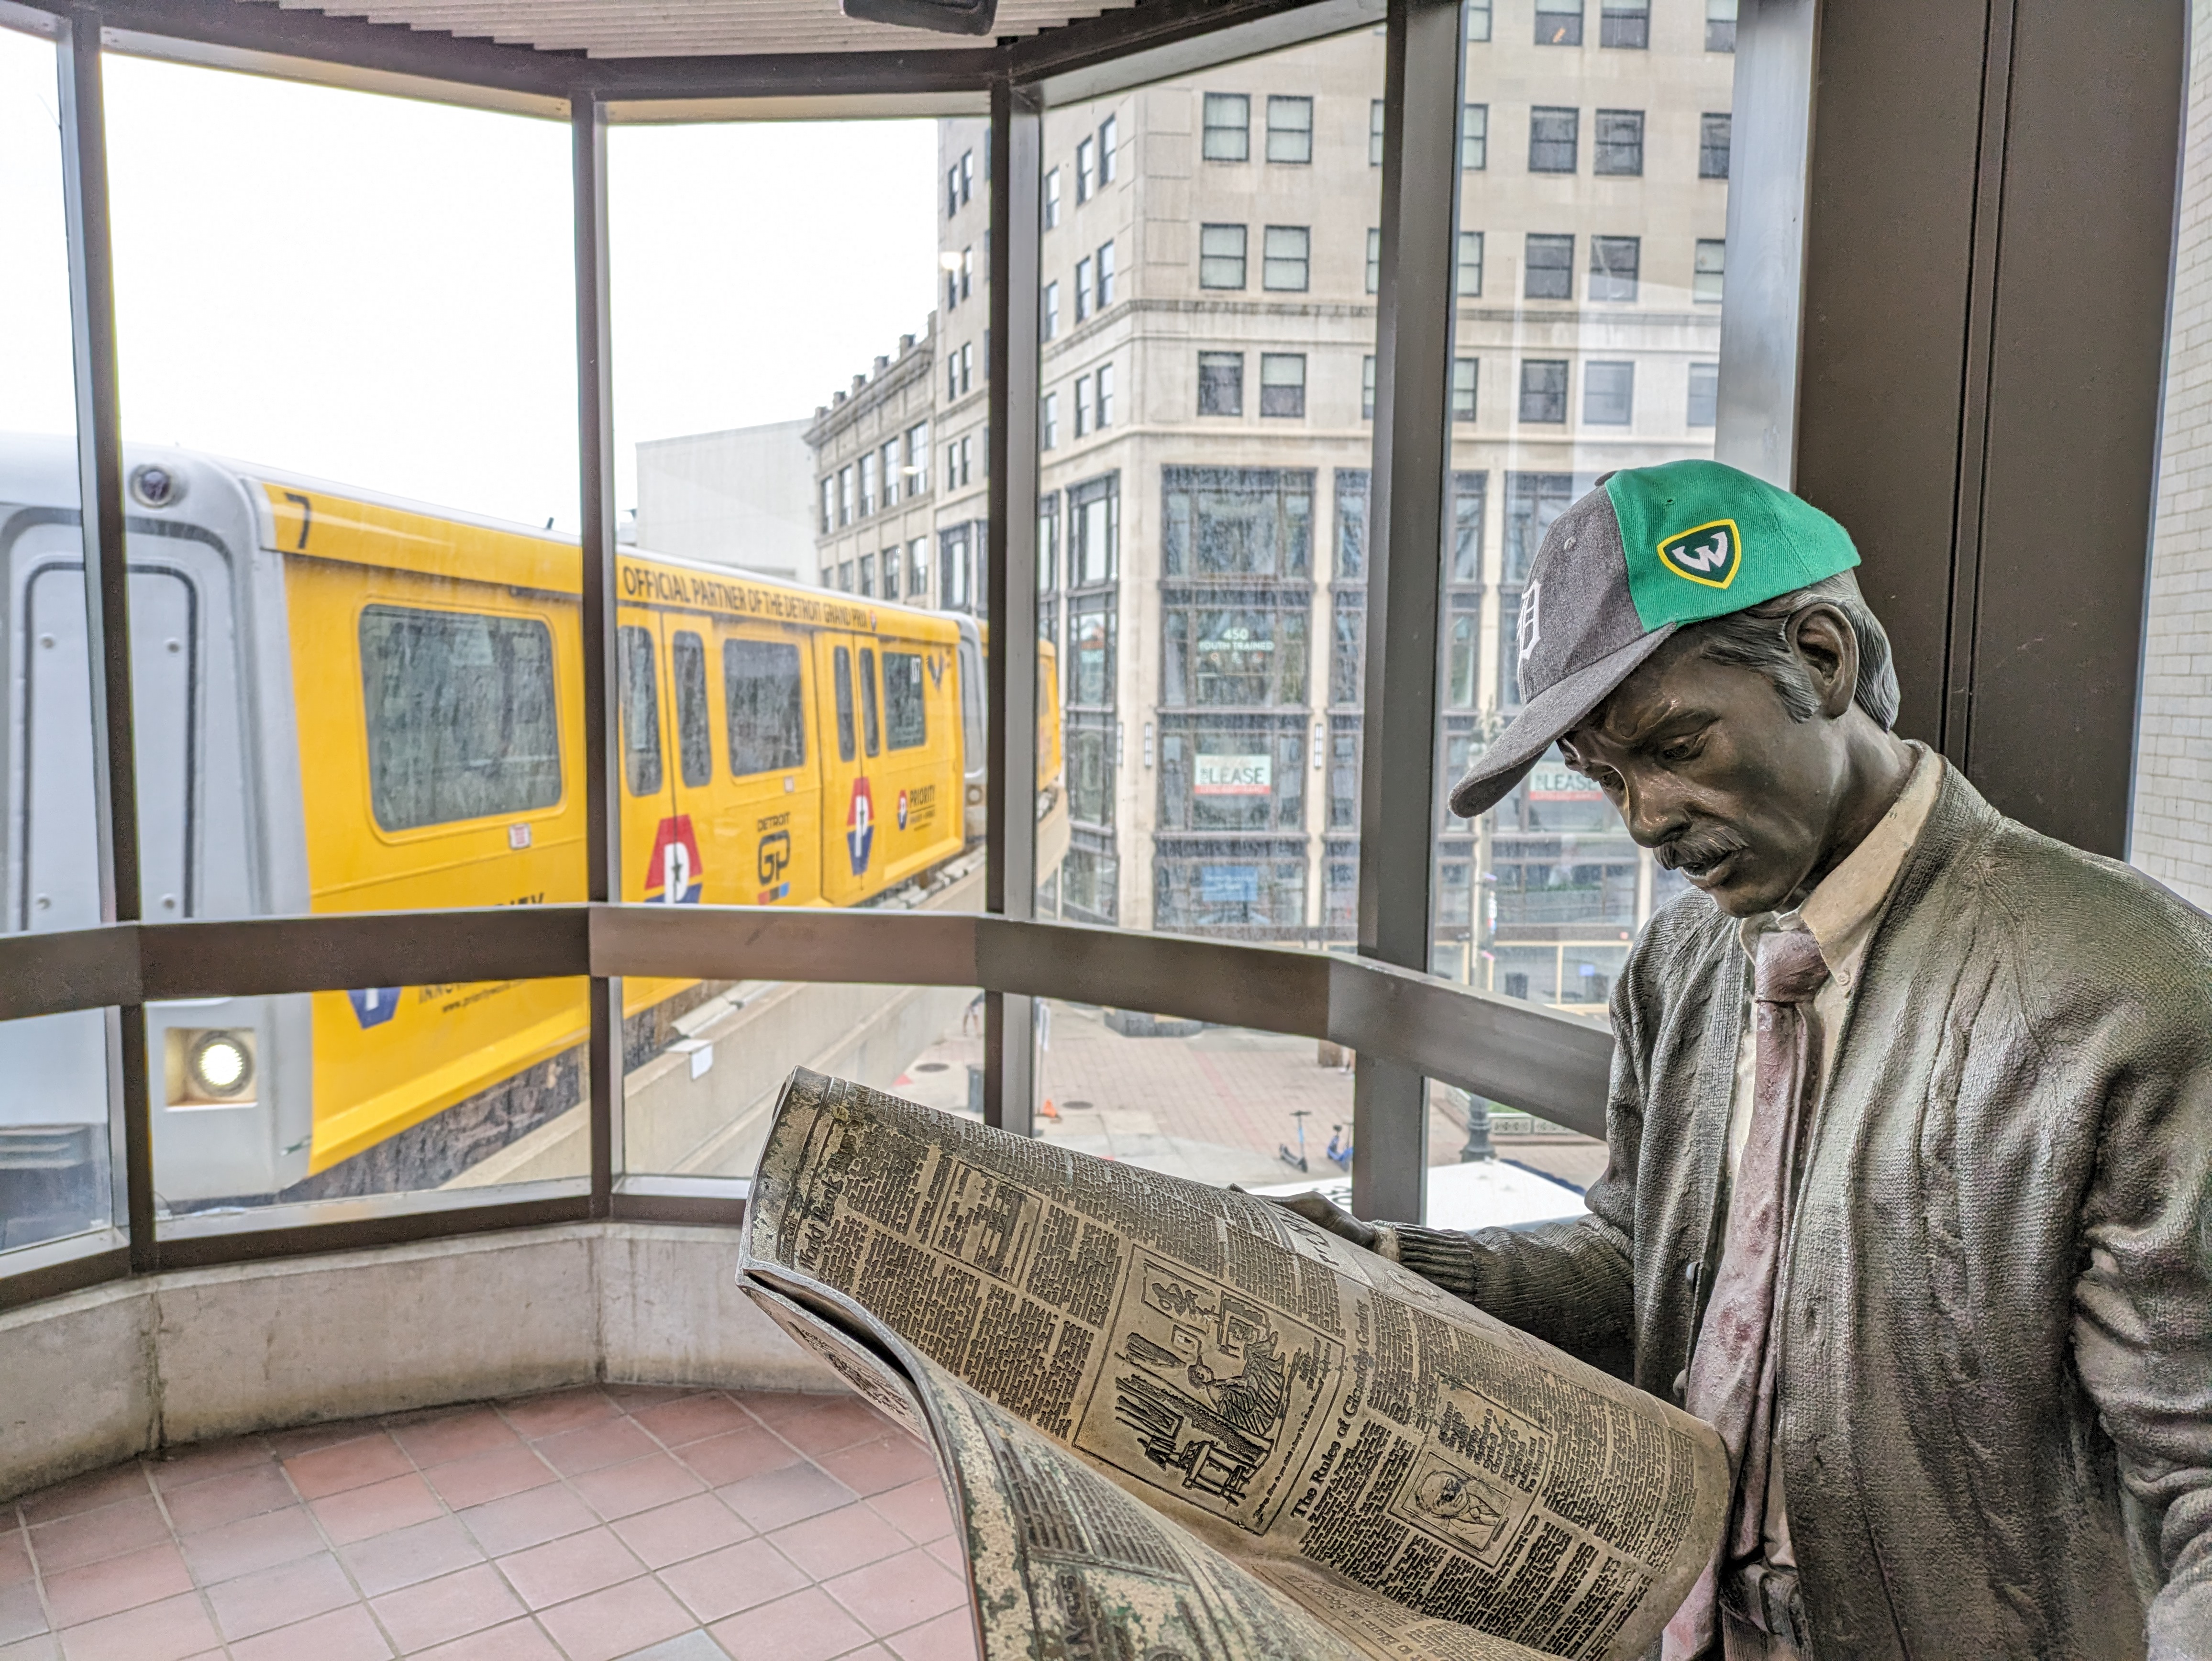 My Tigers Wayne State hat on the "Catching Up" statue of a man reading the Detroit News on the Grand Circus Park People Mover platform